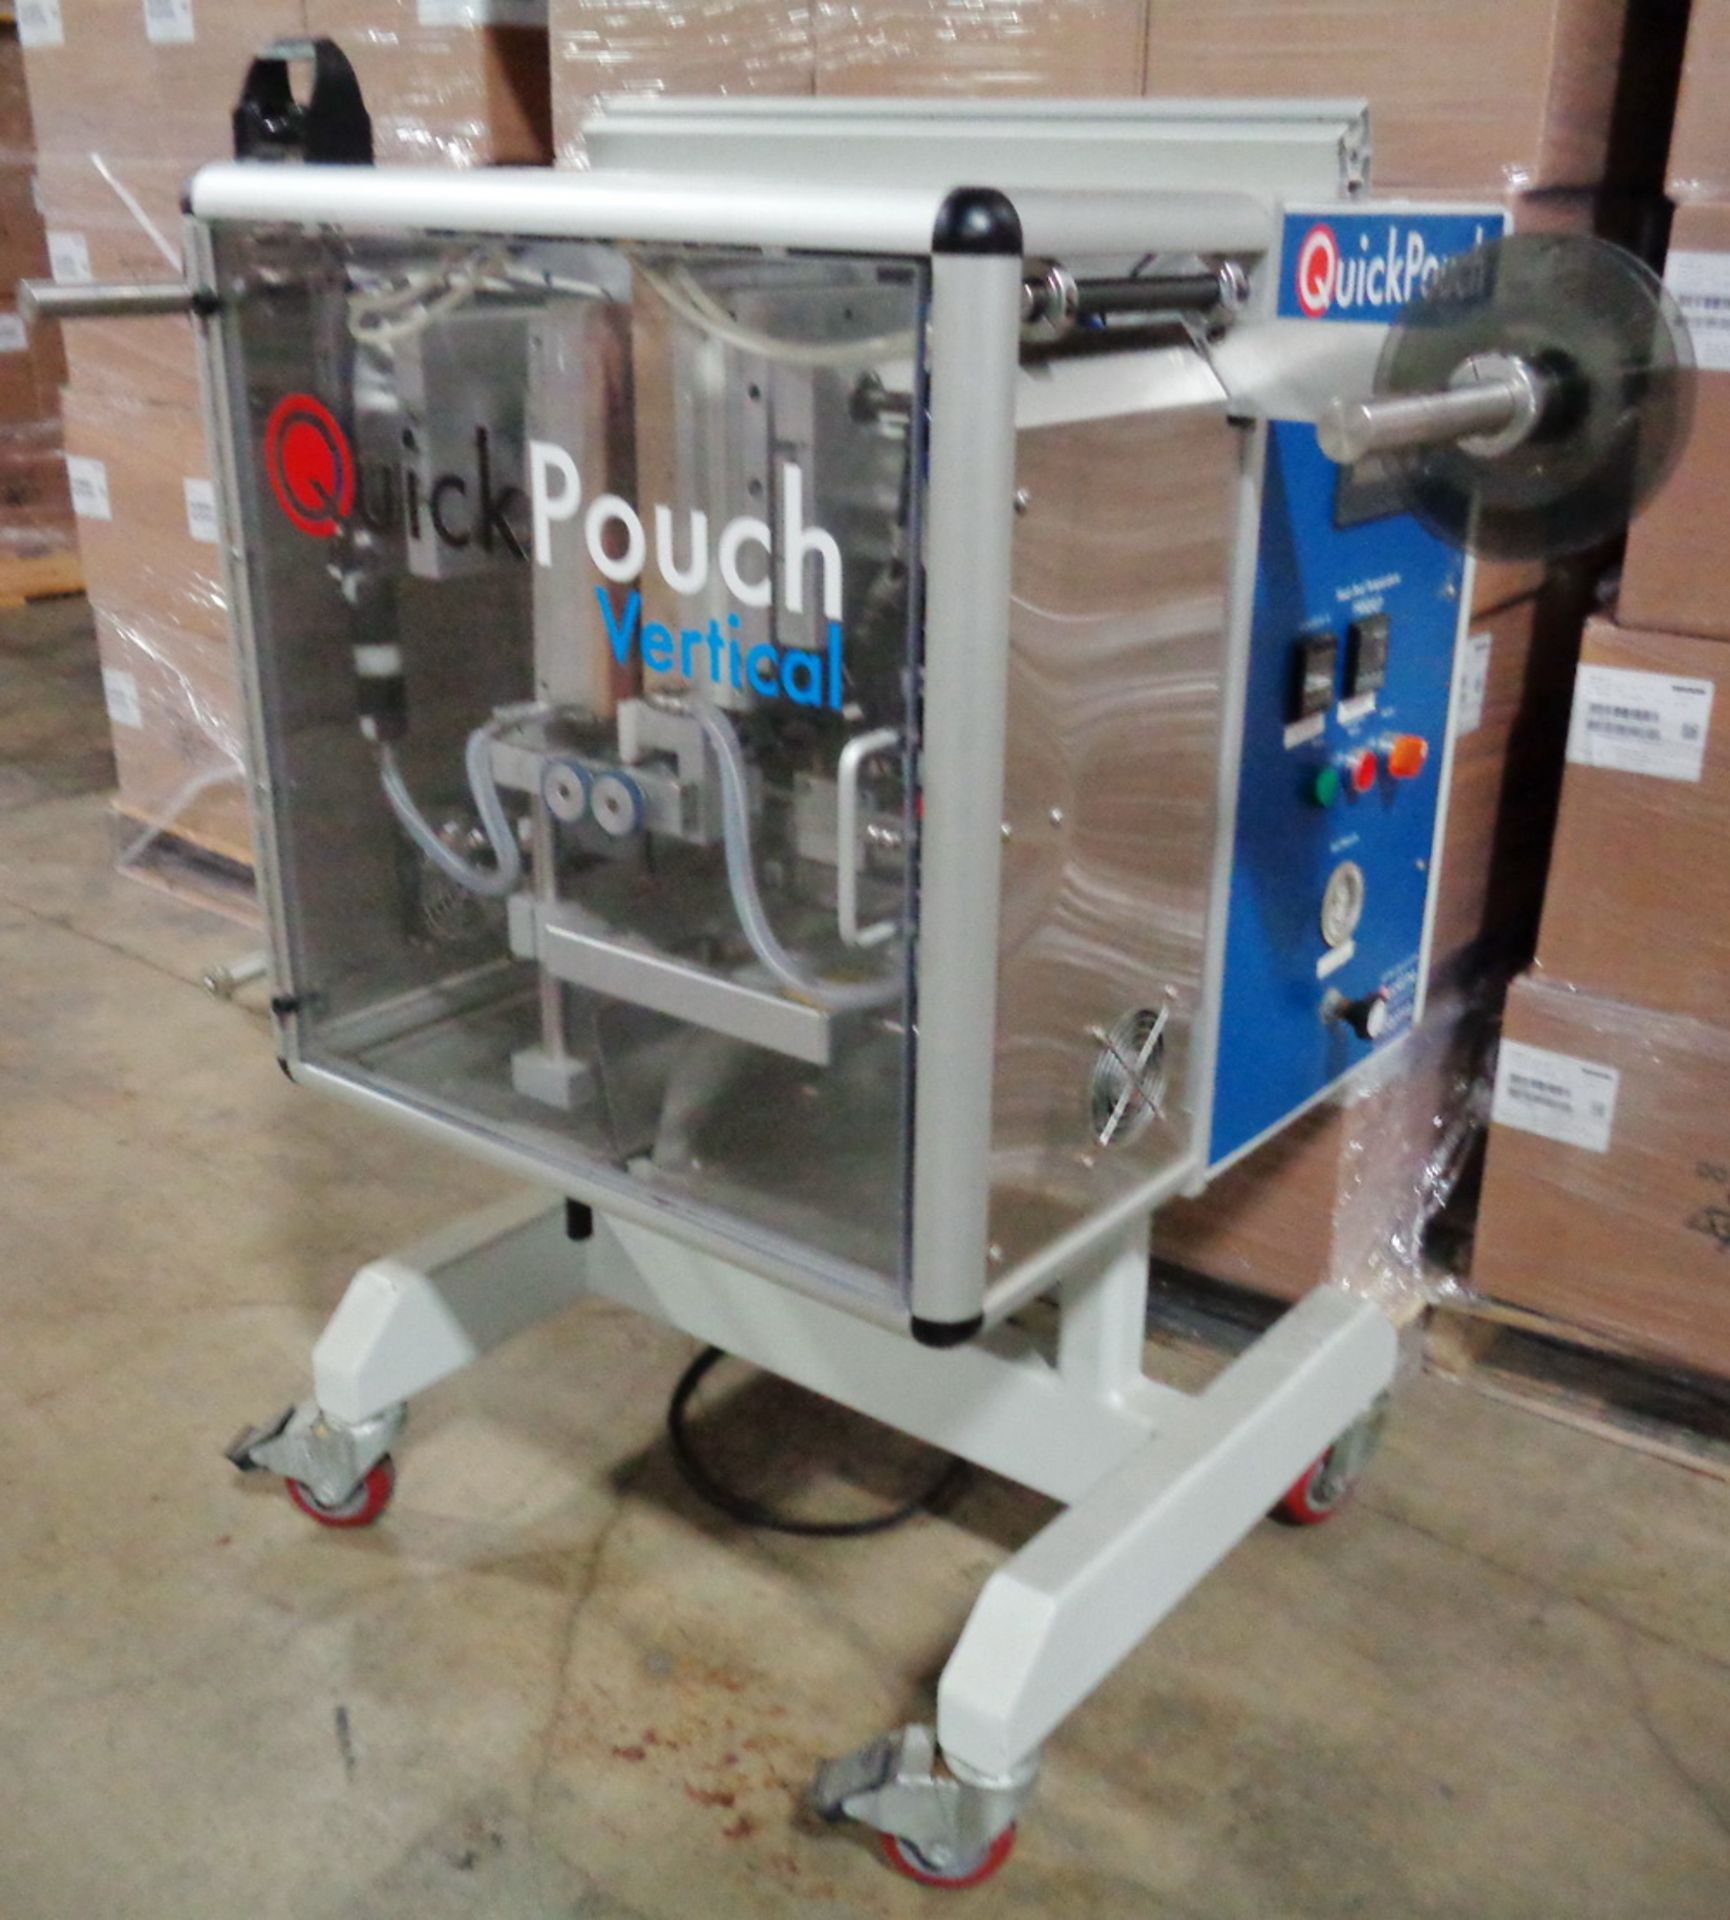 Quick Pouch Vertical Compact Pouch Form/Fill/Seal Machine, new 2011 - Image 3 of 11